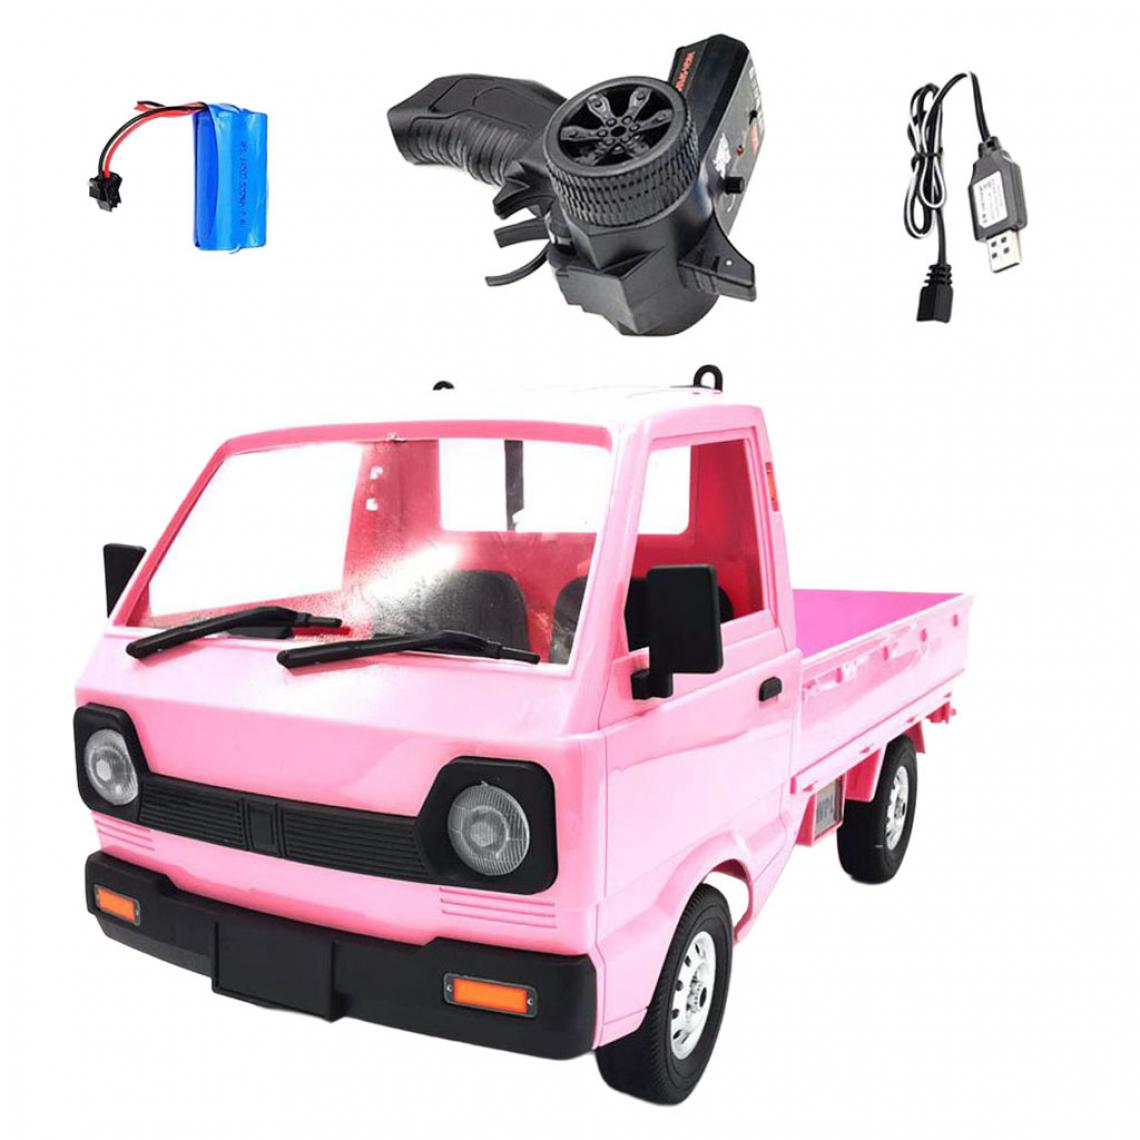 marque generique - WPL RC Truck Scale 4WD 260 Motor Electric Hobby Toys Pink 1 Batterie - Accessoires maquettes